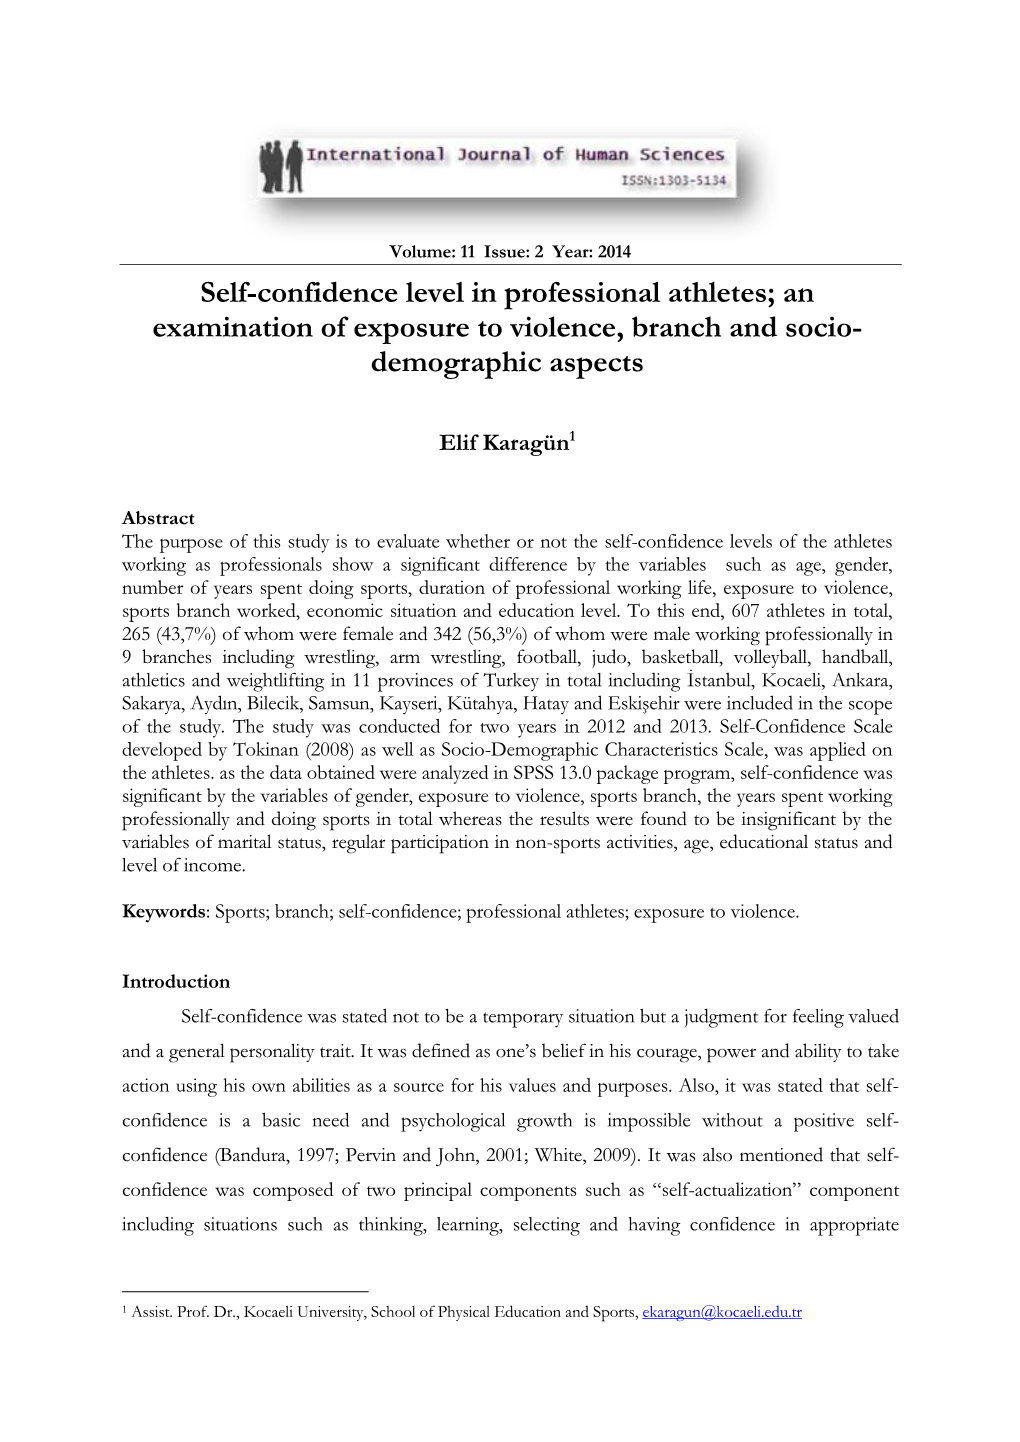 Self-Confidence Level in Professional Athletes; an Examination of Exposure to Violence, Branch and Socio- Demographic Aspects